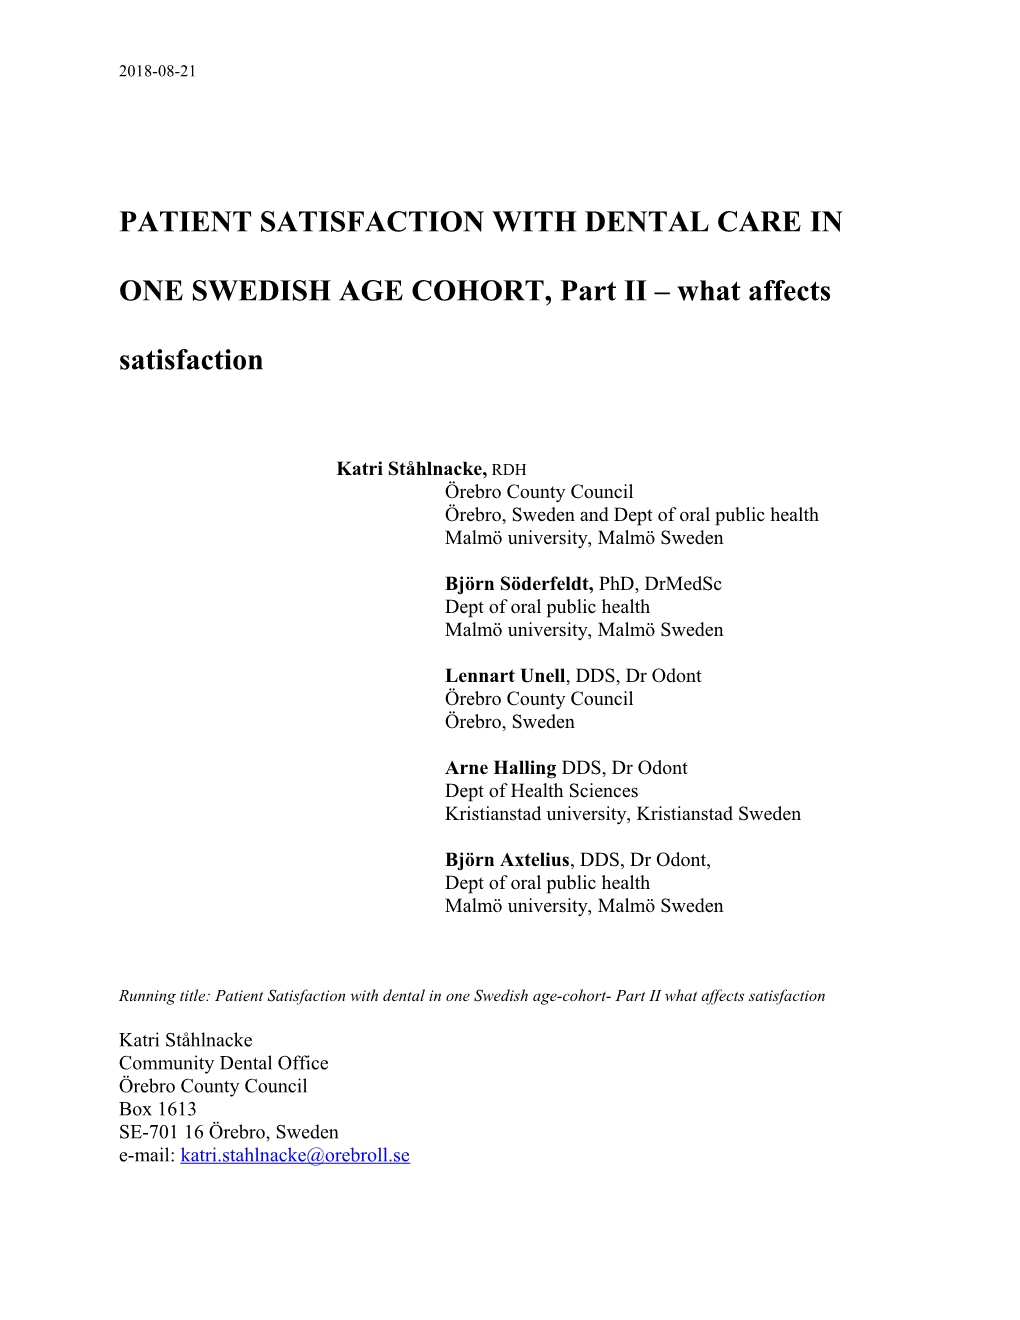 PATIENT SATISFACTION with DENTAL CARE in ONE SWEDISH AGE COHORT, Part II What Affects